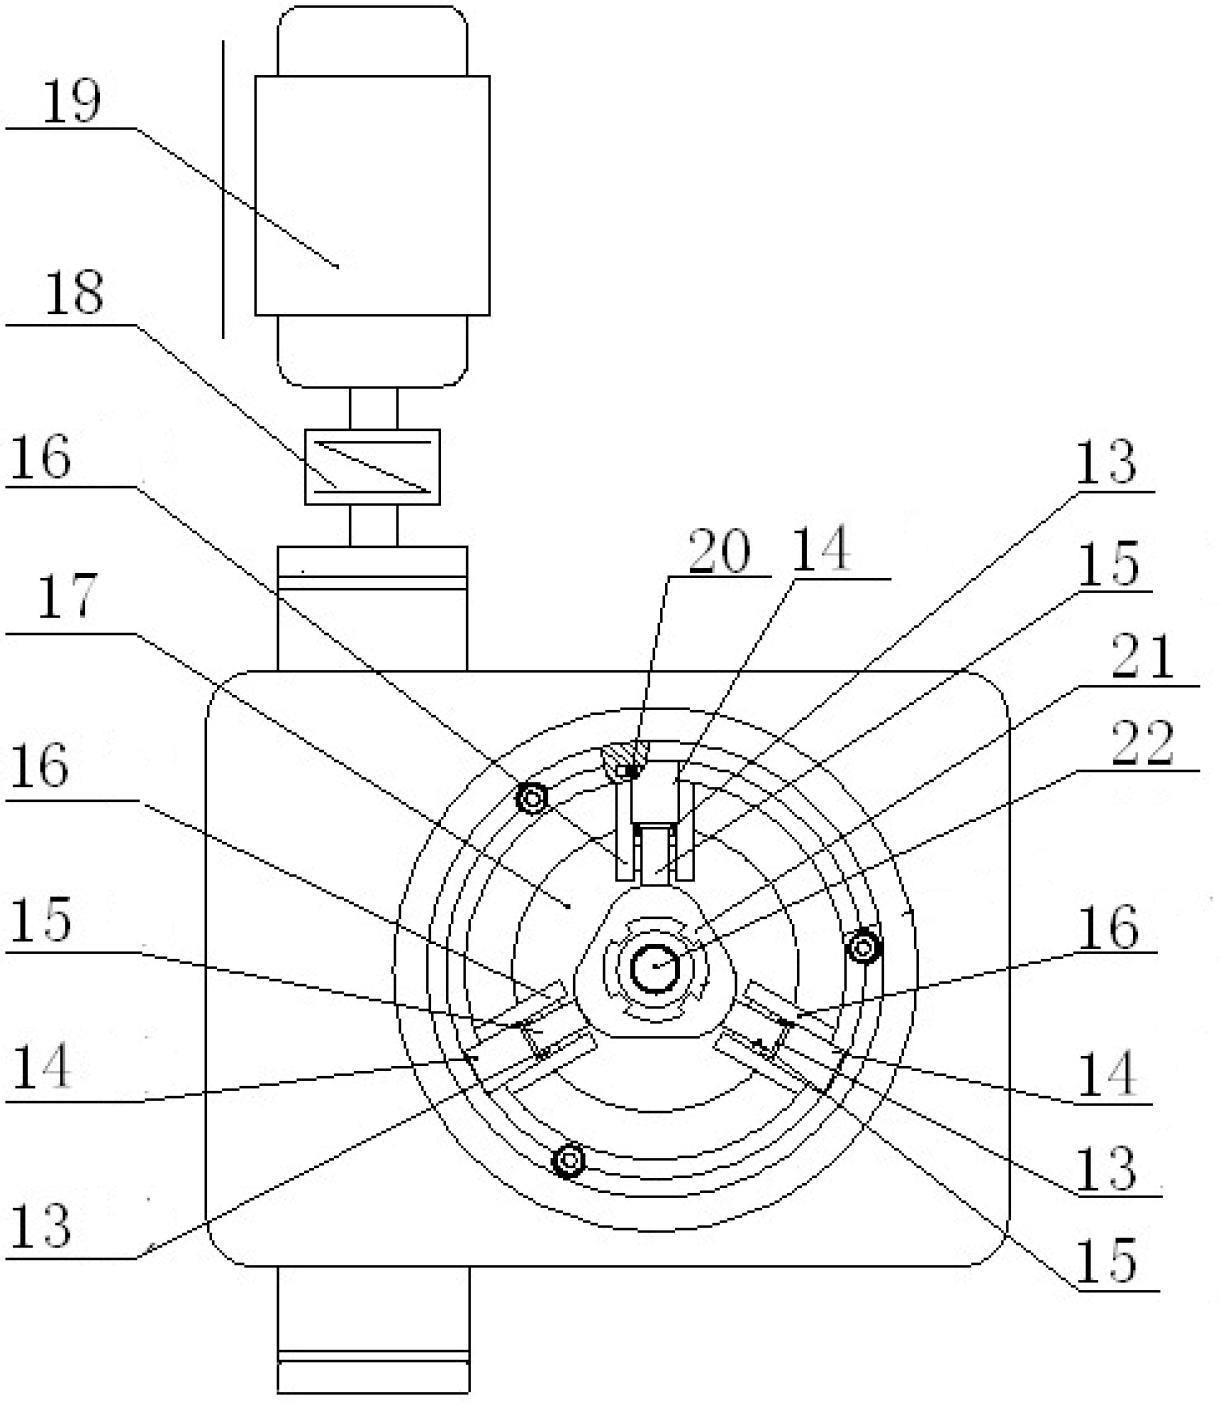 Device for indexing and resetting paper-based friction plate during attaching